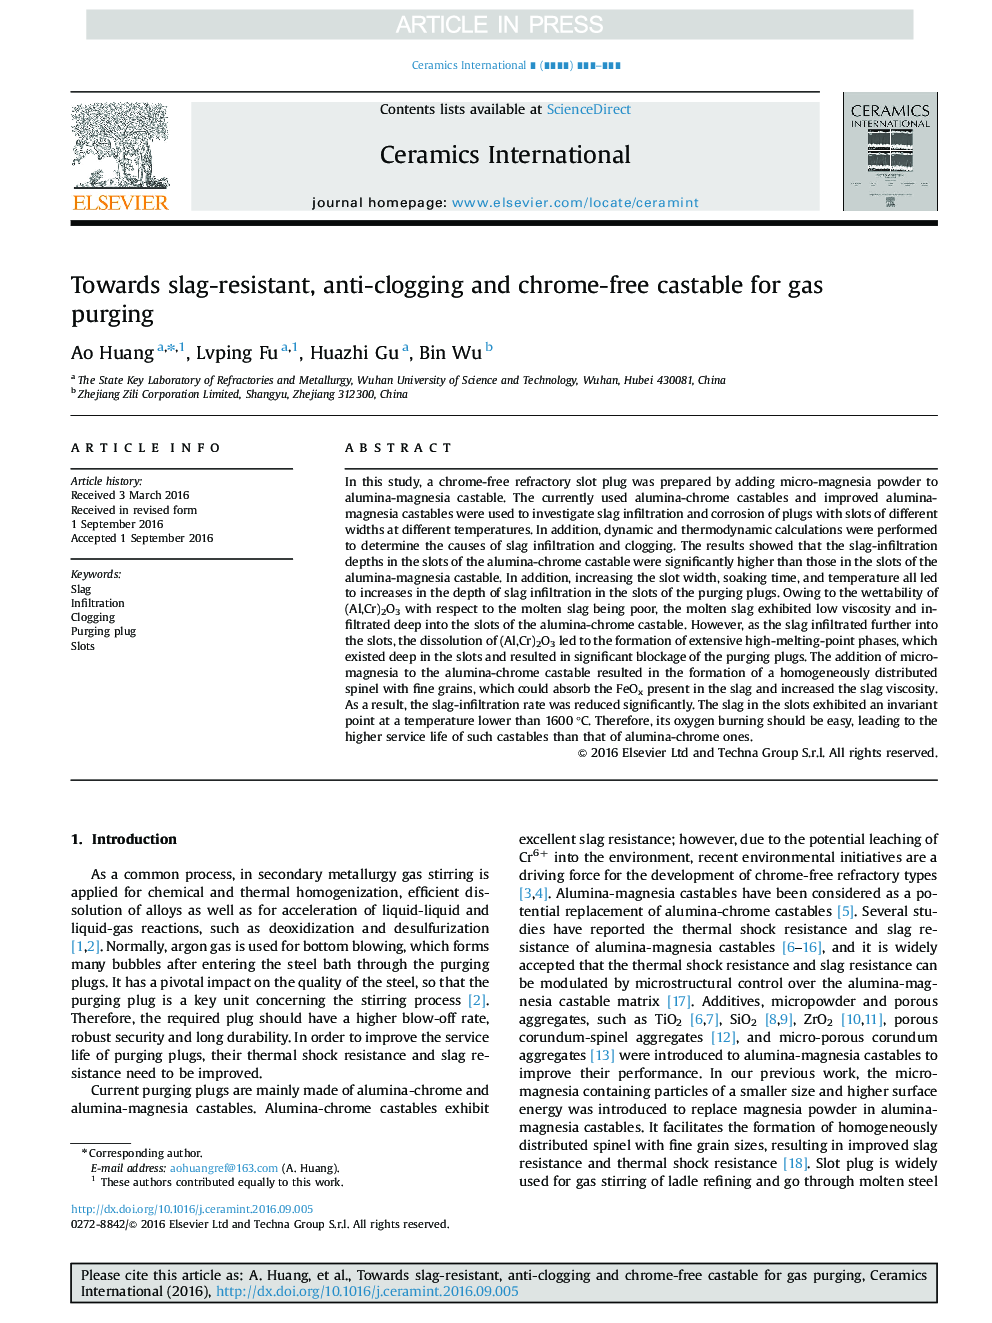 Towards slag-resistant, anti-clogging and chrome-free castable for gas purging